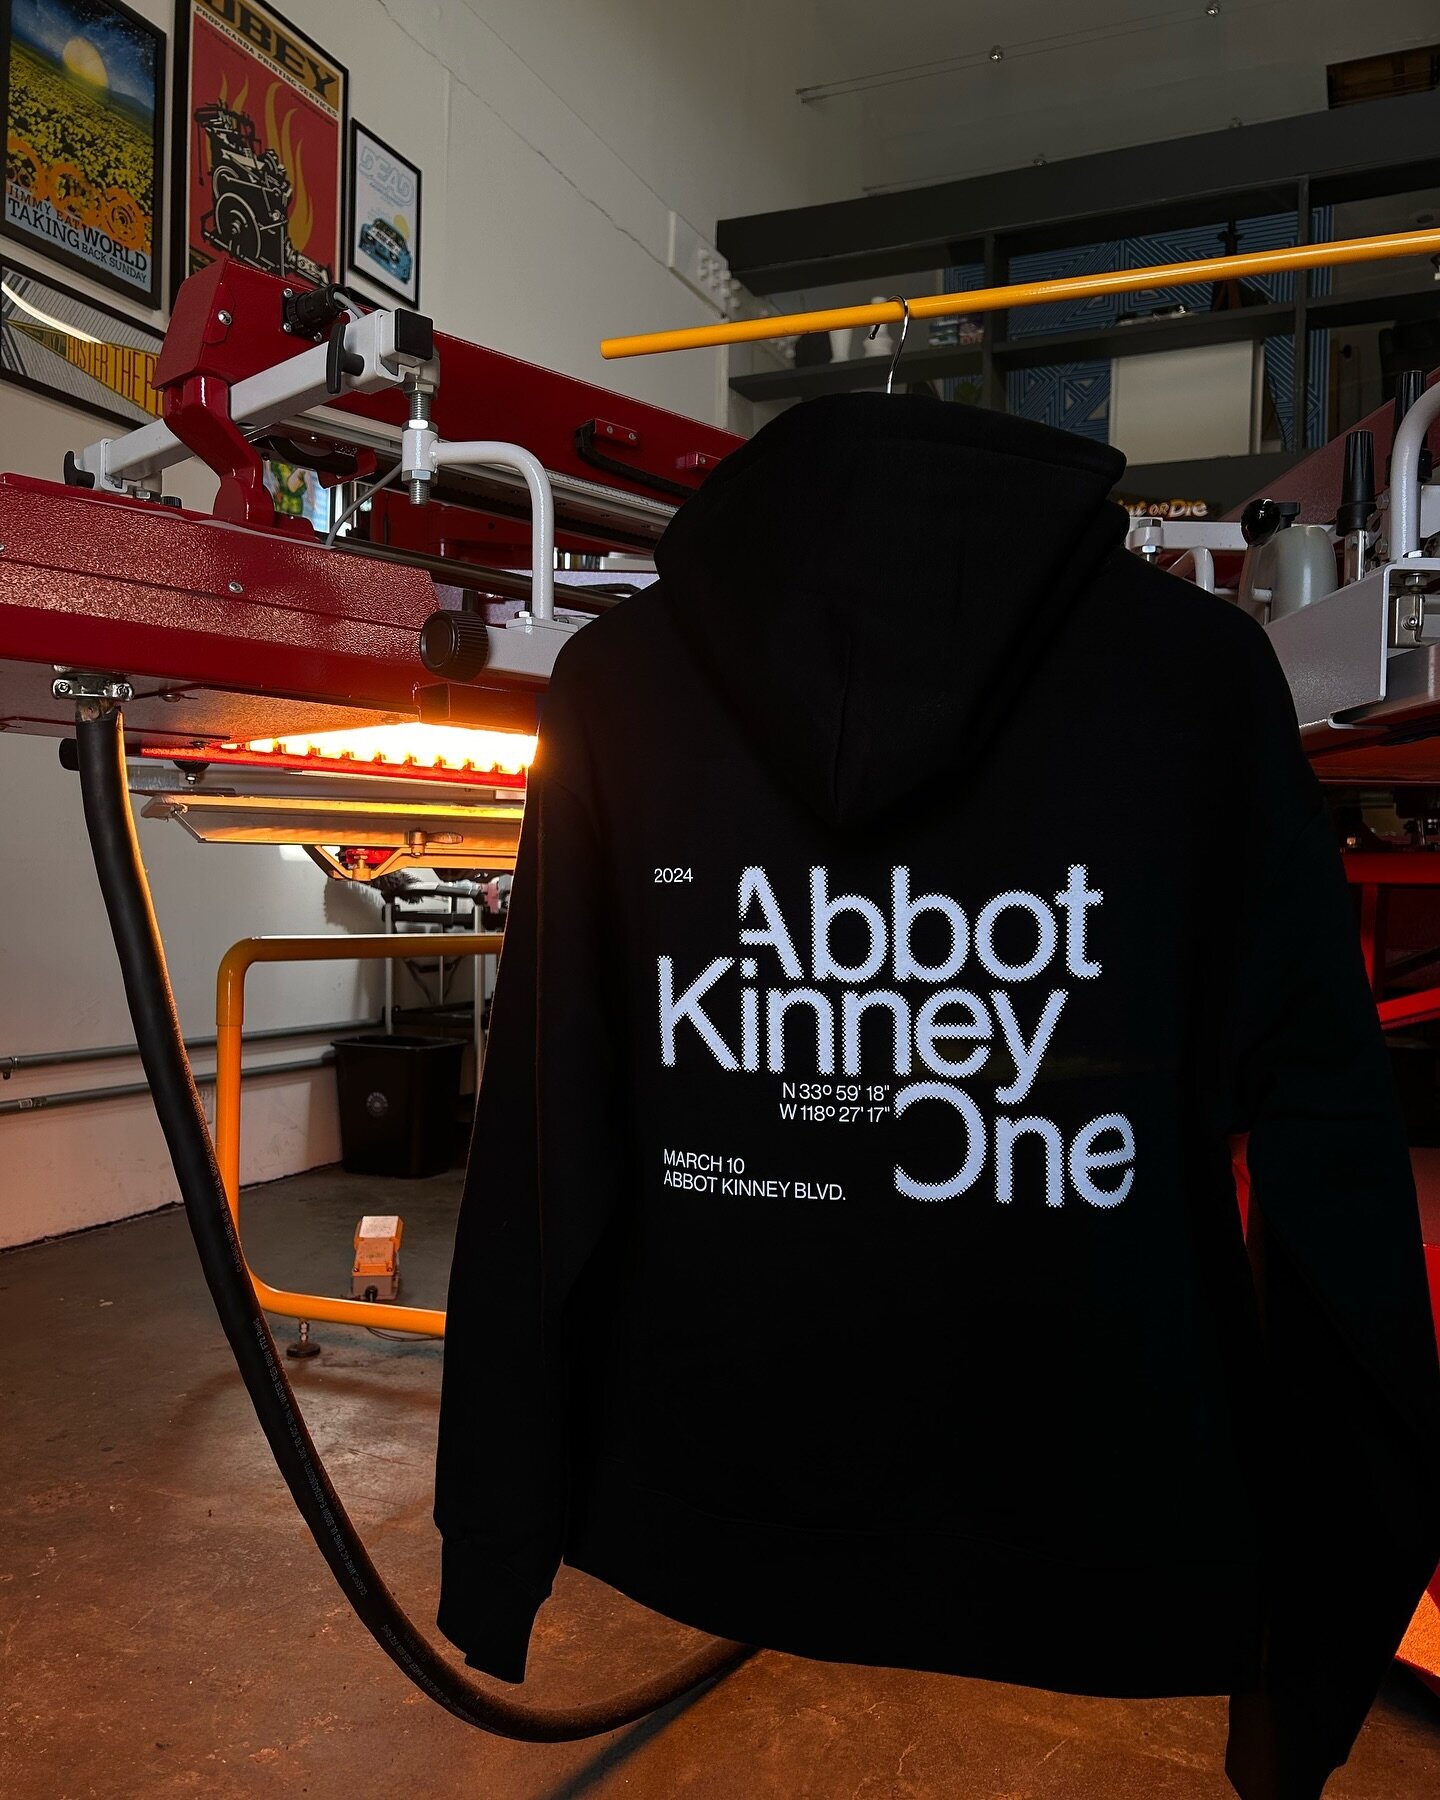 Always a pleasure working with our friends @venicerunclub 🏃🏻&zwj;♂️ 
Congratulations on the inaugural one mile race @abbotkinneyone, excited to see it grow 🫱🏽&zwj;🫲🏾🔥

#screenprinting #printshop #custom #hoodie #abbotkinneyone #venicerunclub #